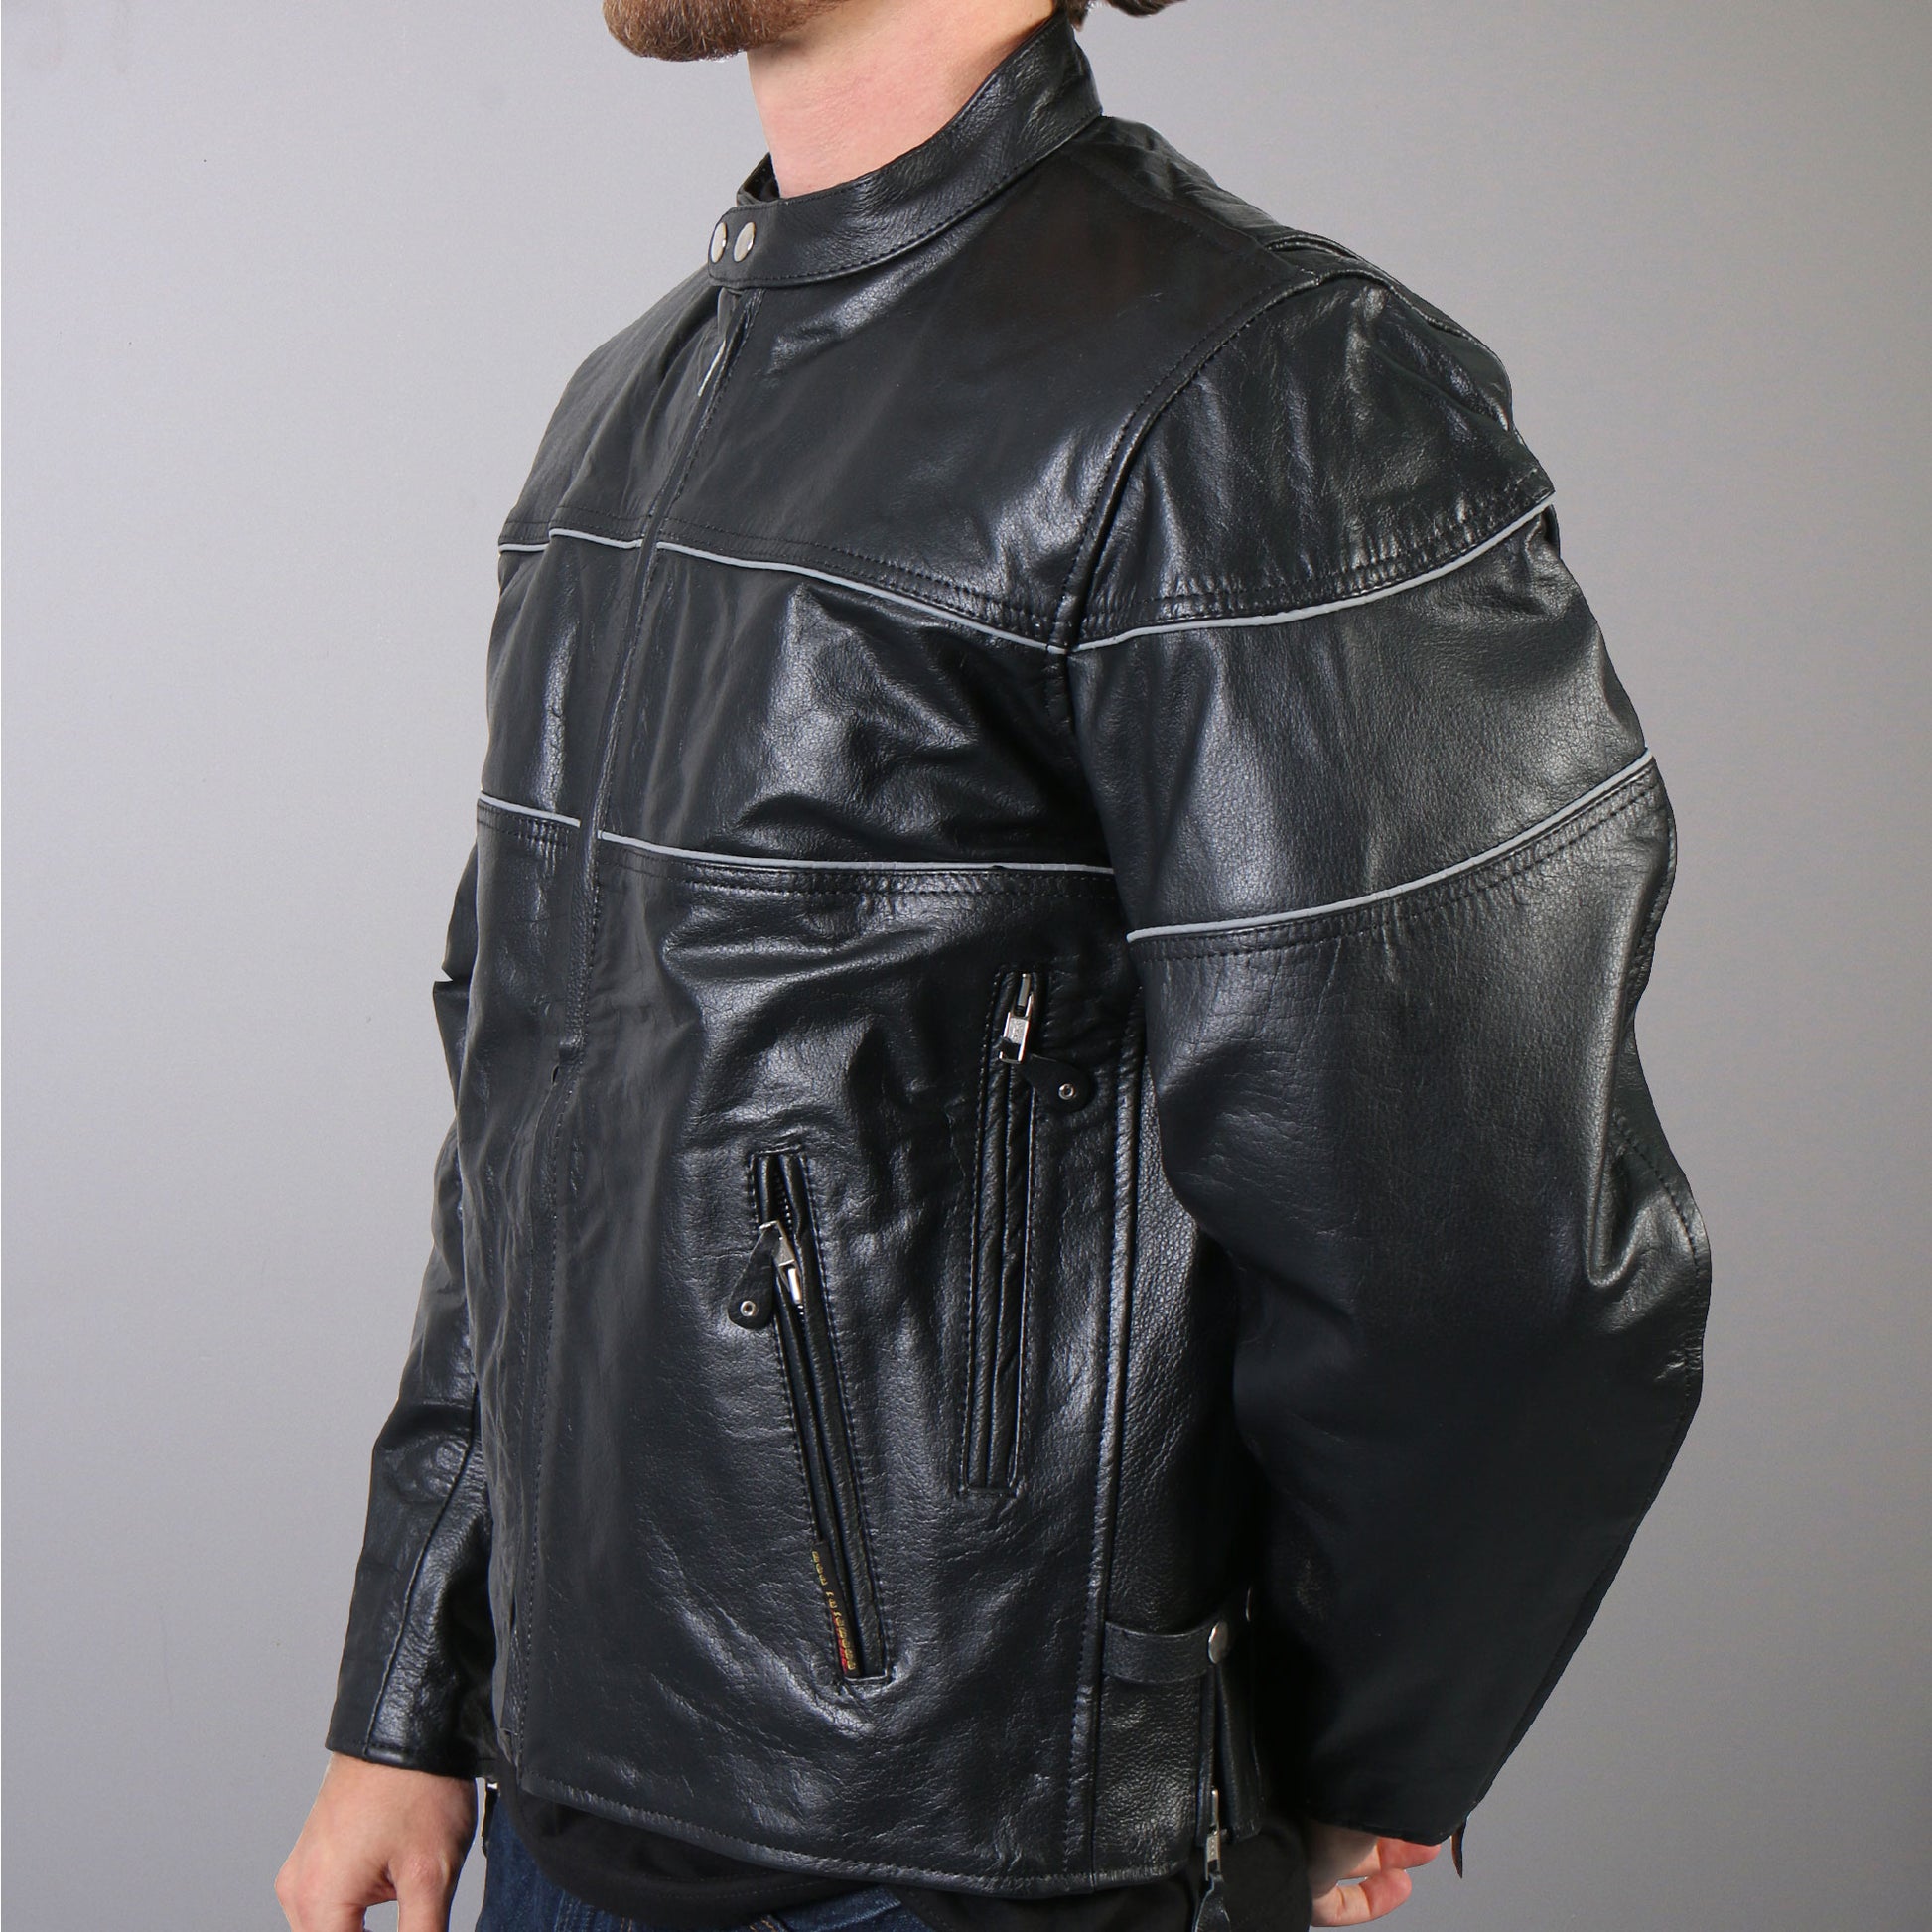 Hot Leathers JKM1004 Men's Leather Vented Scooter Jacket with Reflective Piping